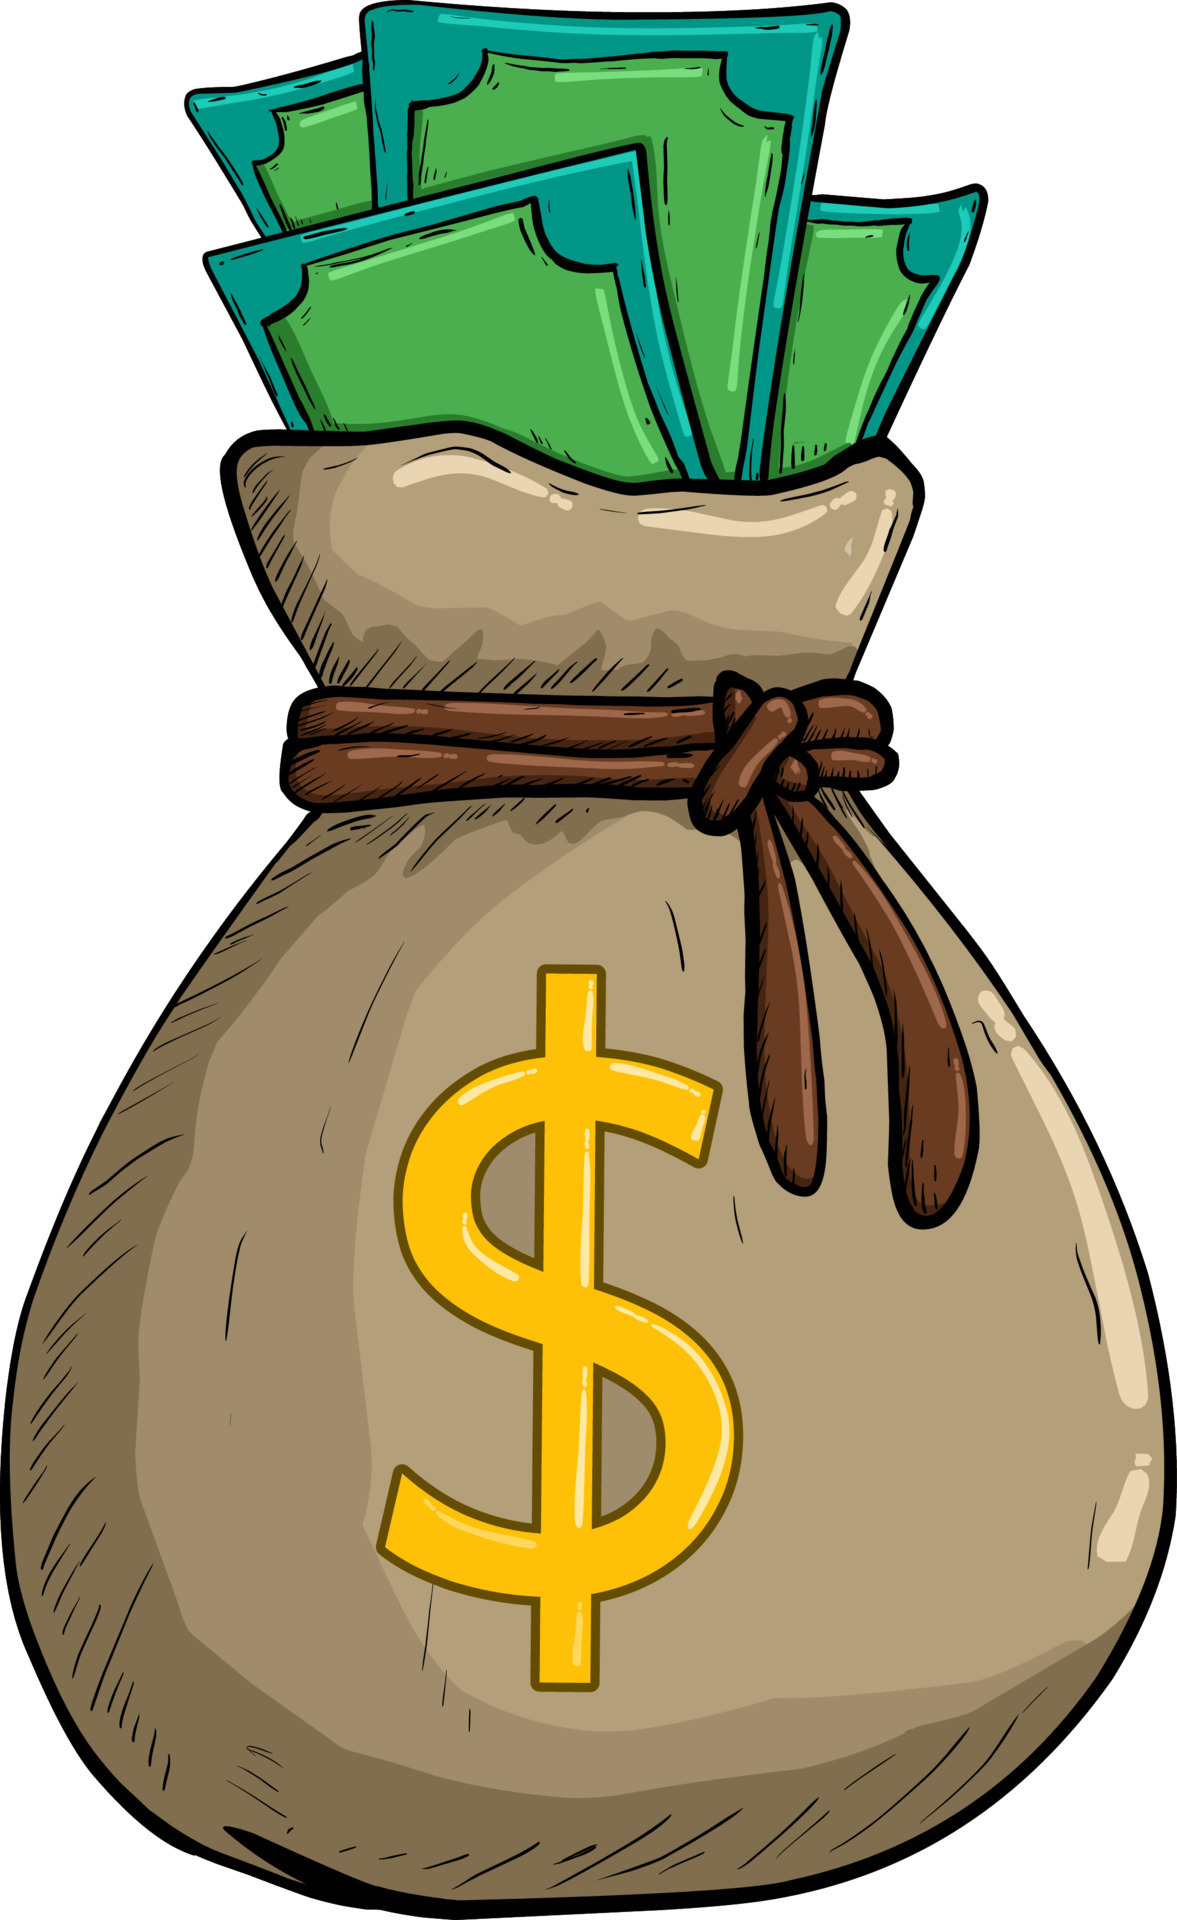 Money bag vector on white background. money bag sketch by hand drawing. |  CanStock